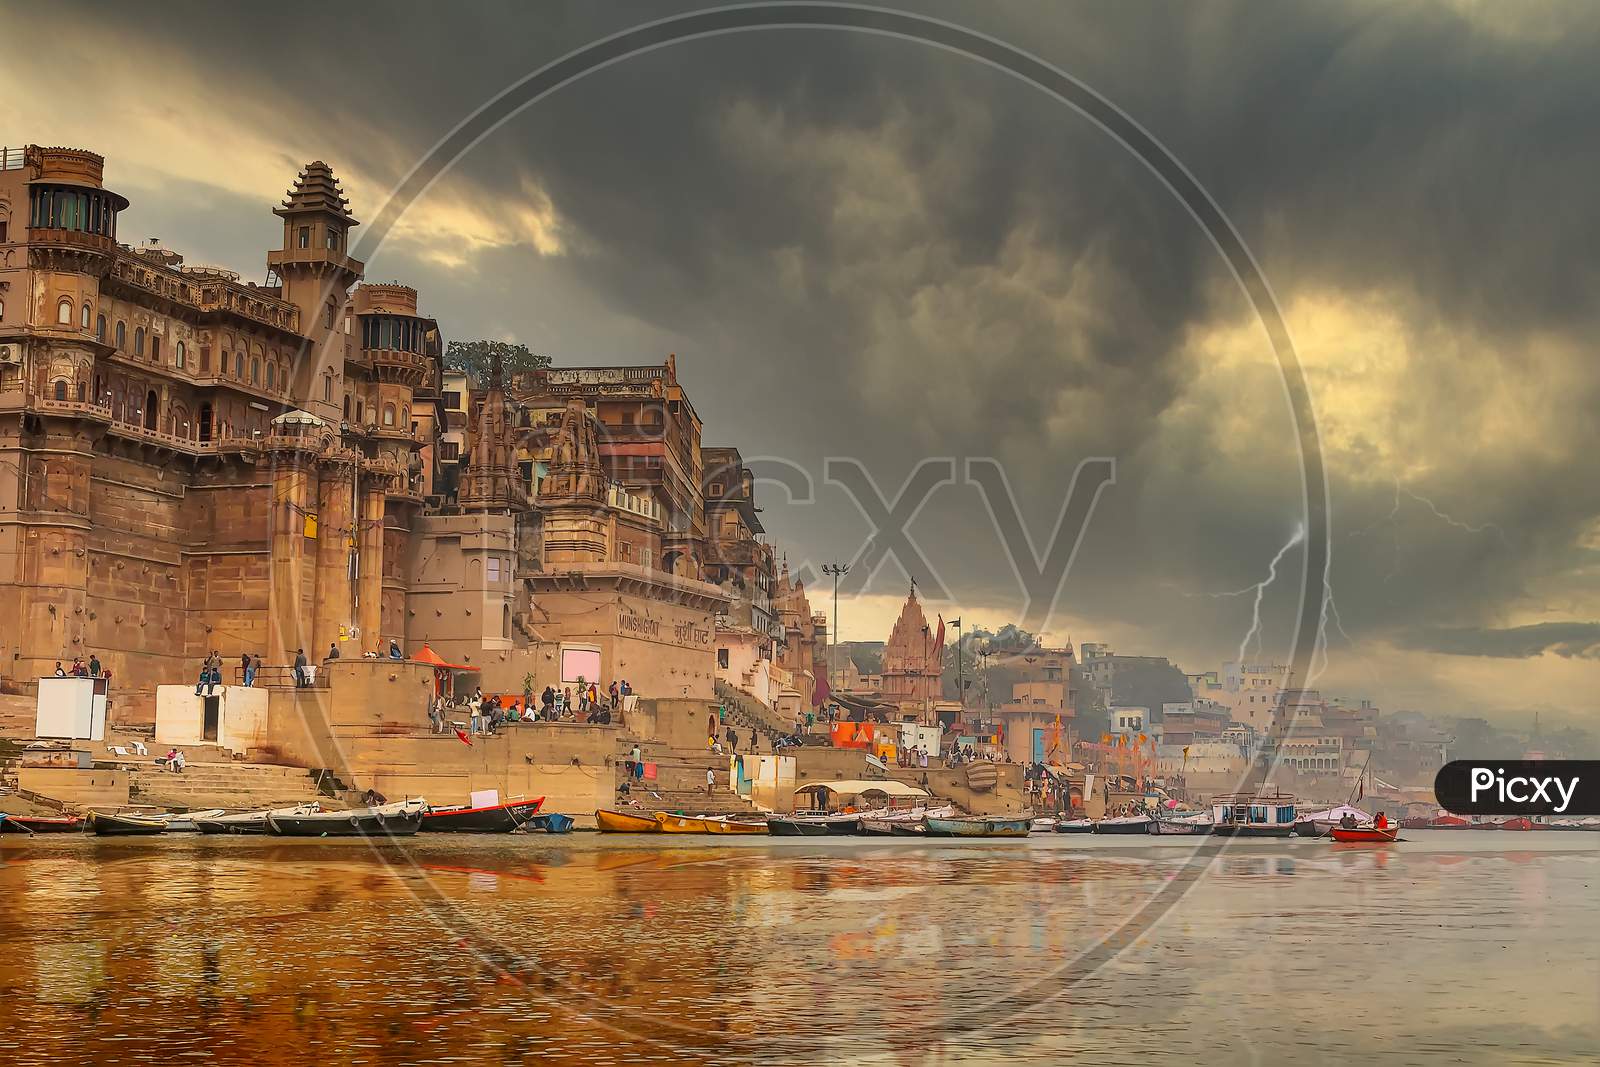 The refections of the historic buildings of Varanasi India as seen from a boat on the river Ganges